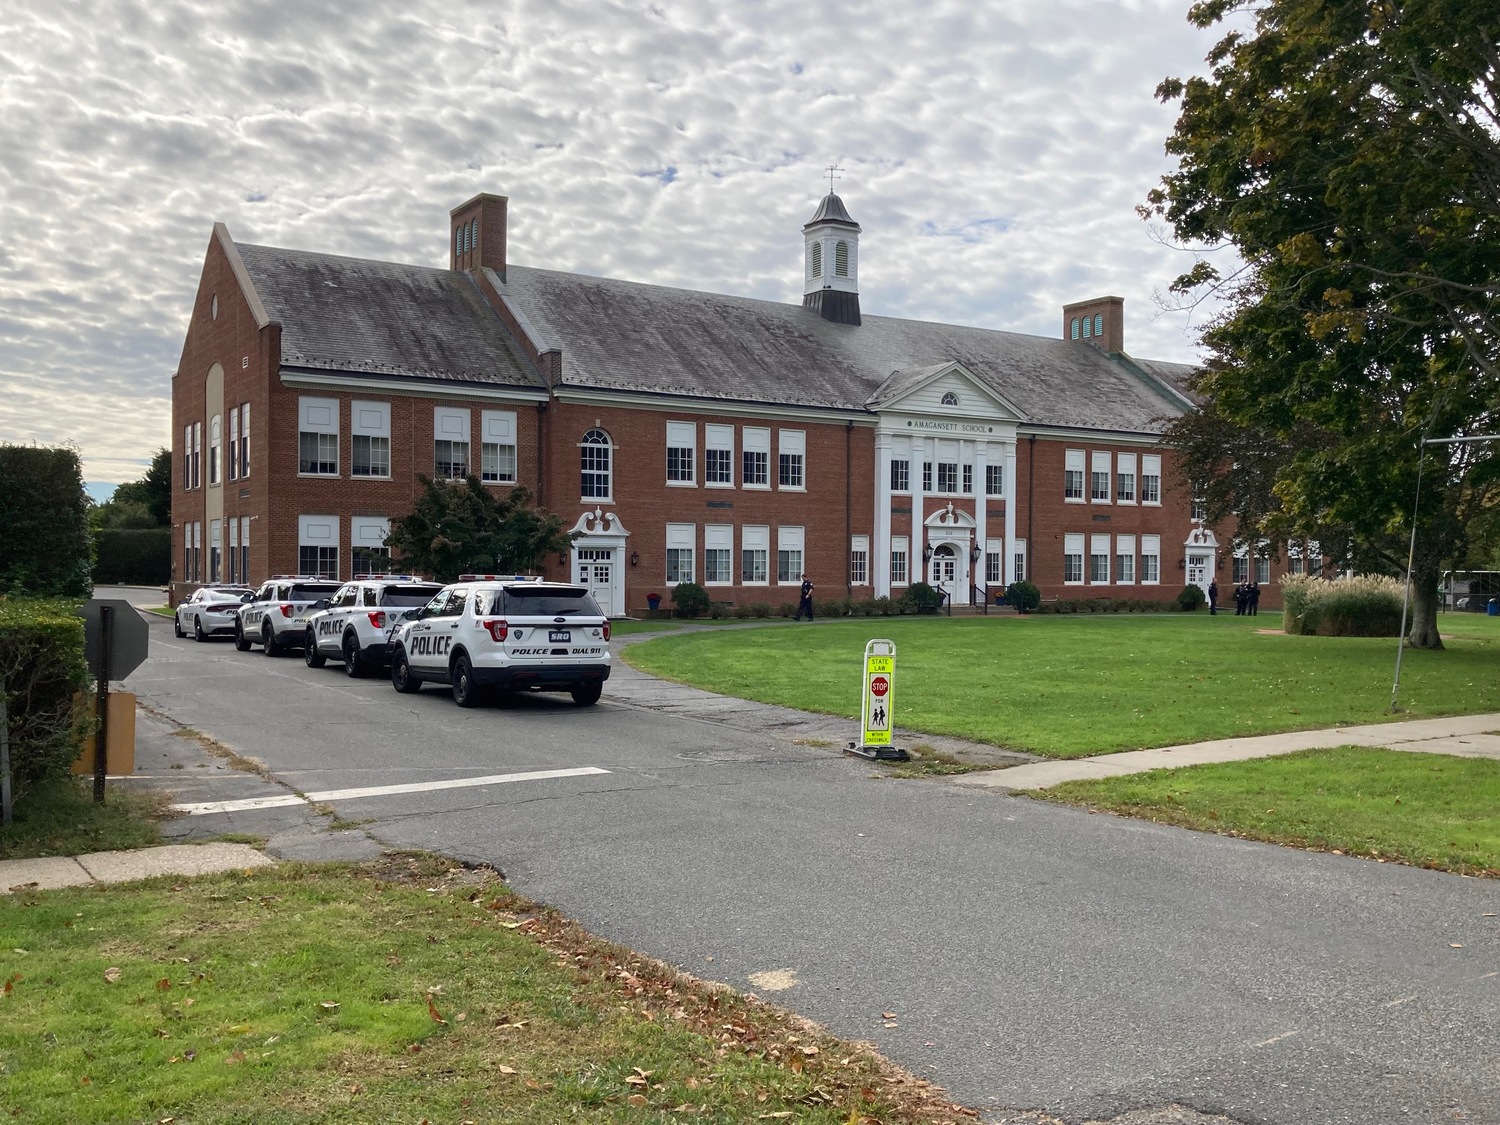 The Amagansett School was evacuated on Wednesday morning after an anonymous bomb threat was made, which police determined was a non-credible threat.